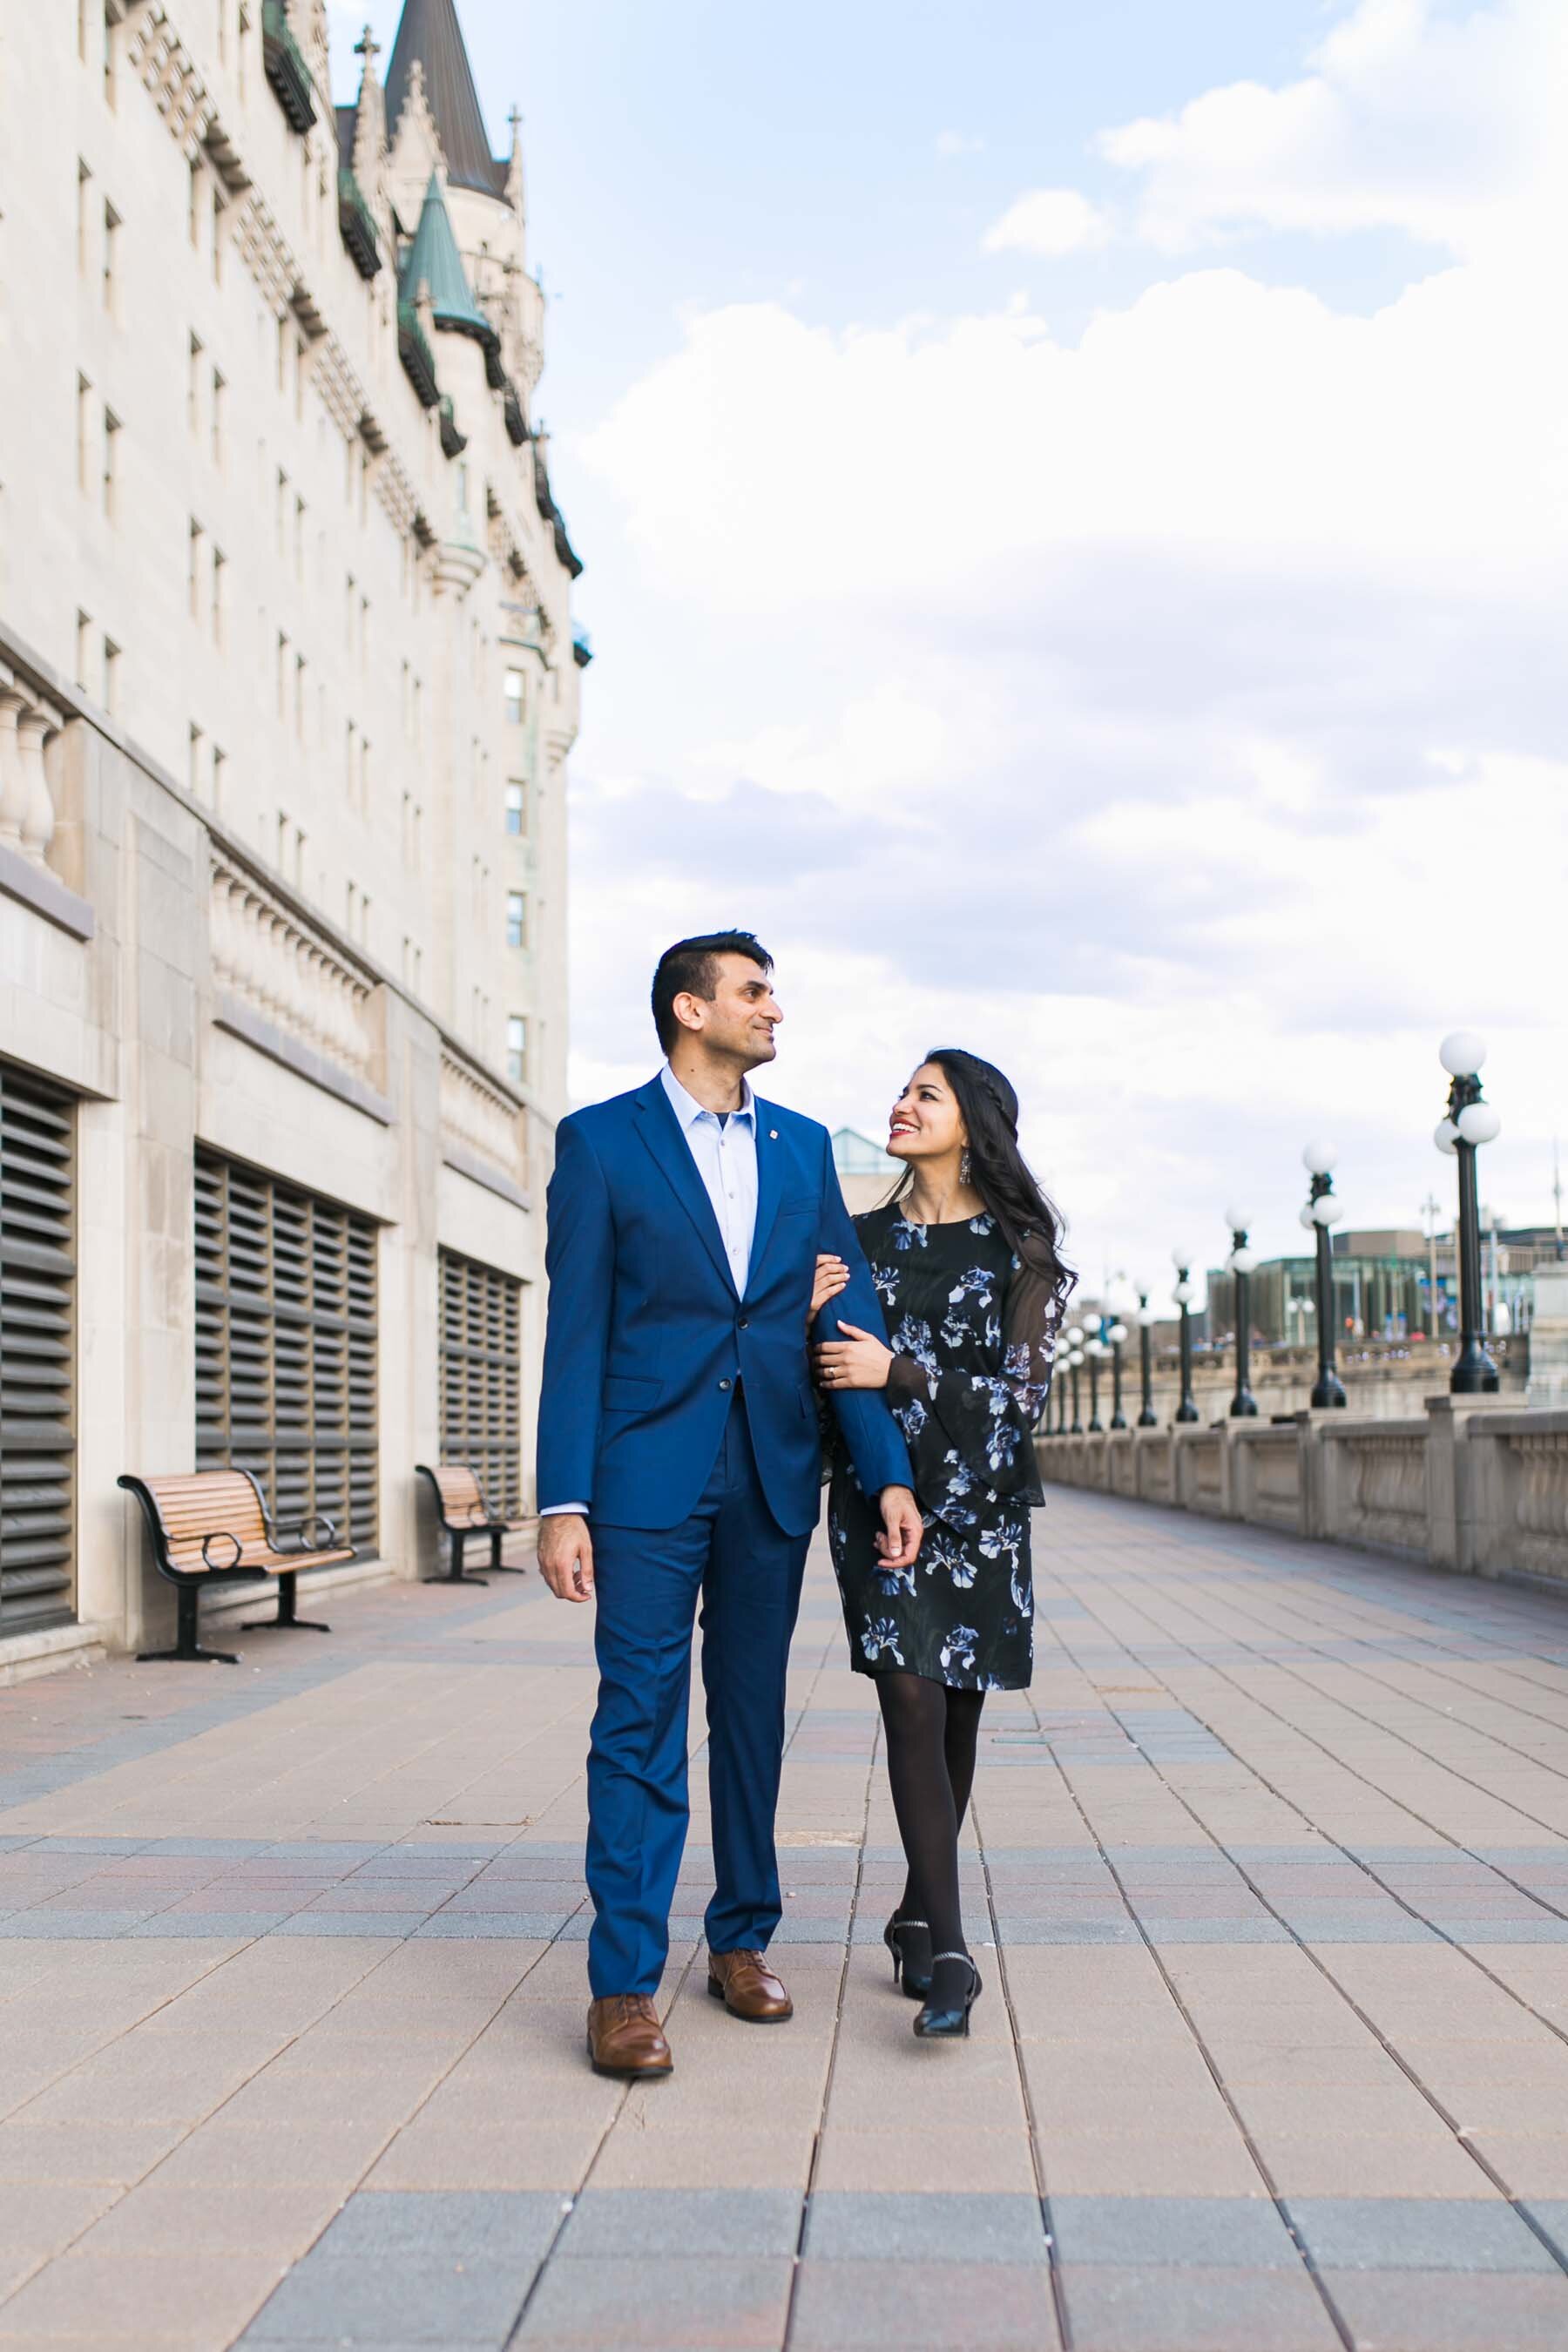 Engagement Photoshoot At Chateau Laurier &amp; Major’s Hill Park in Downtown Ottawa